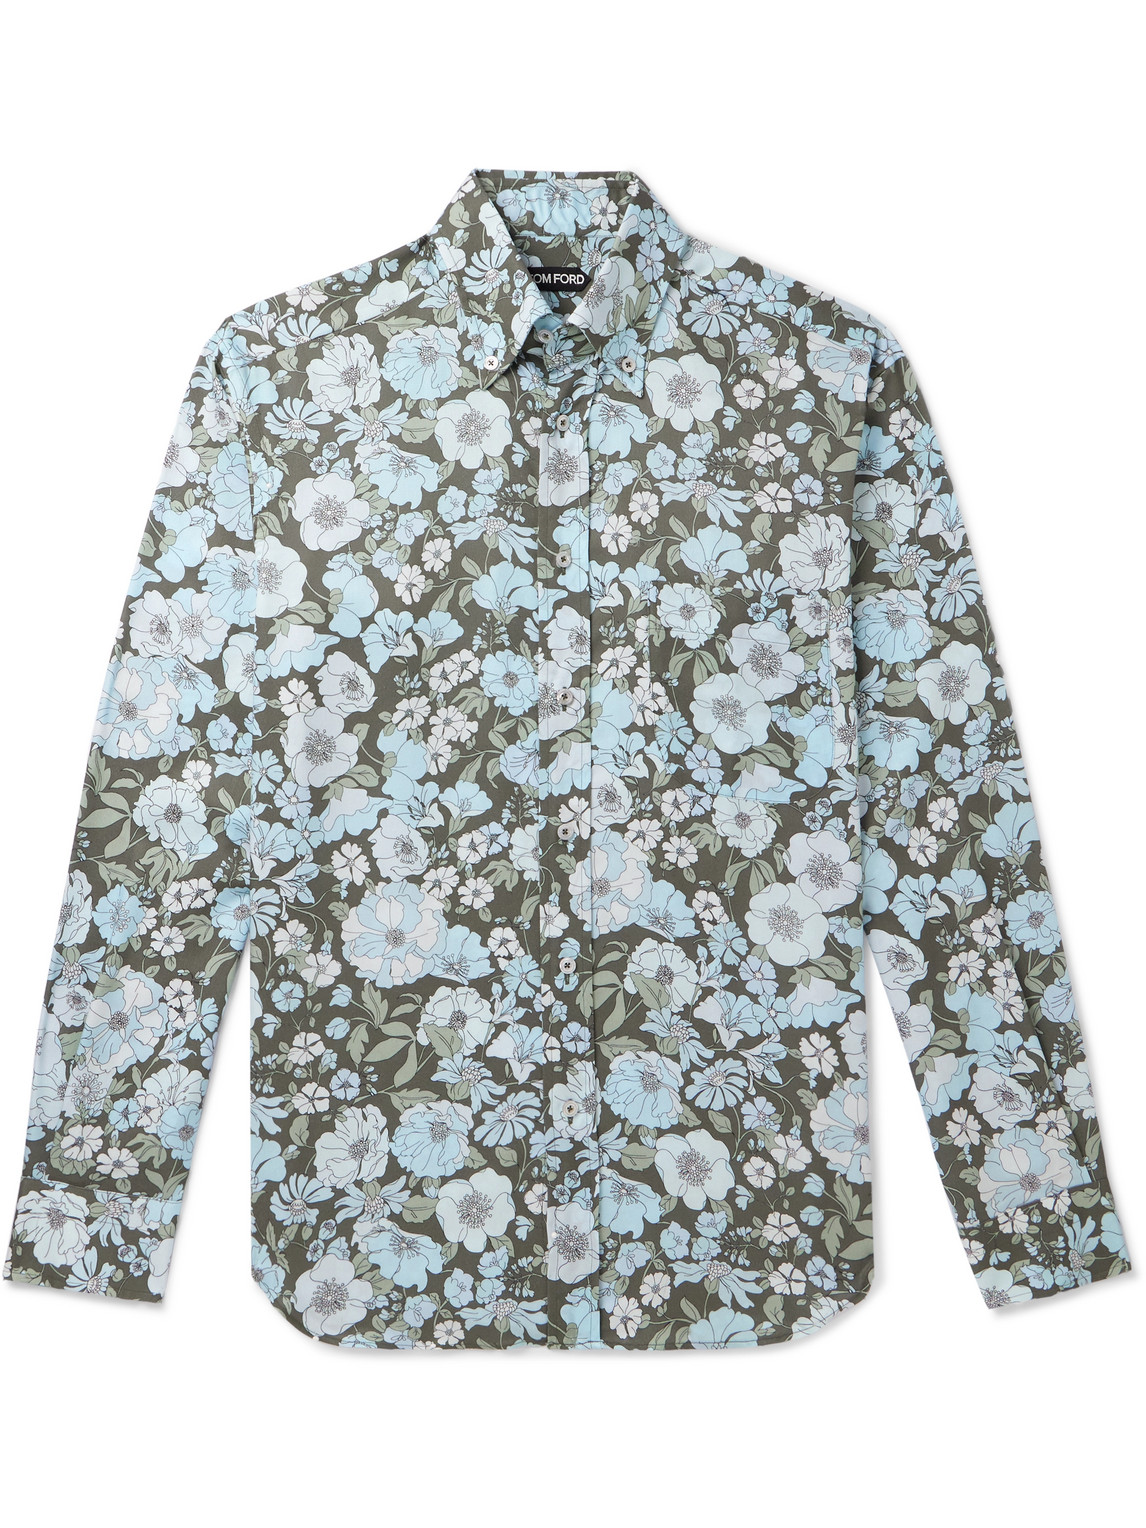 TOM FORD BUTTON-DOWN COLLAR FLORAL-PRINT LYOCELL SHIRT